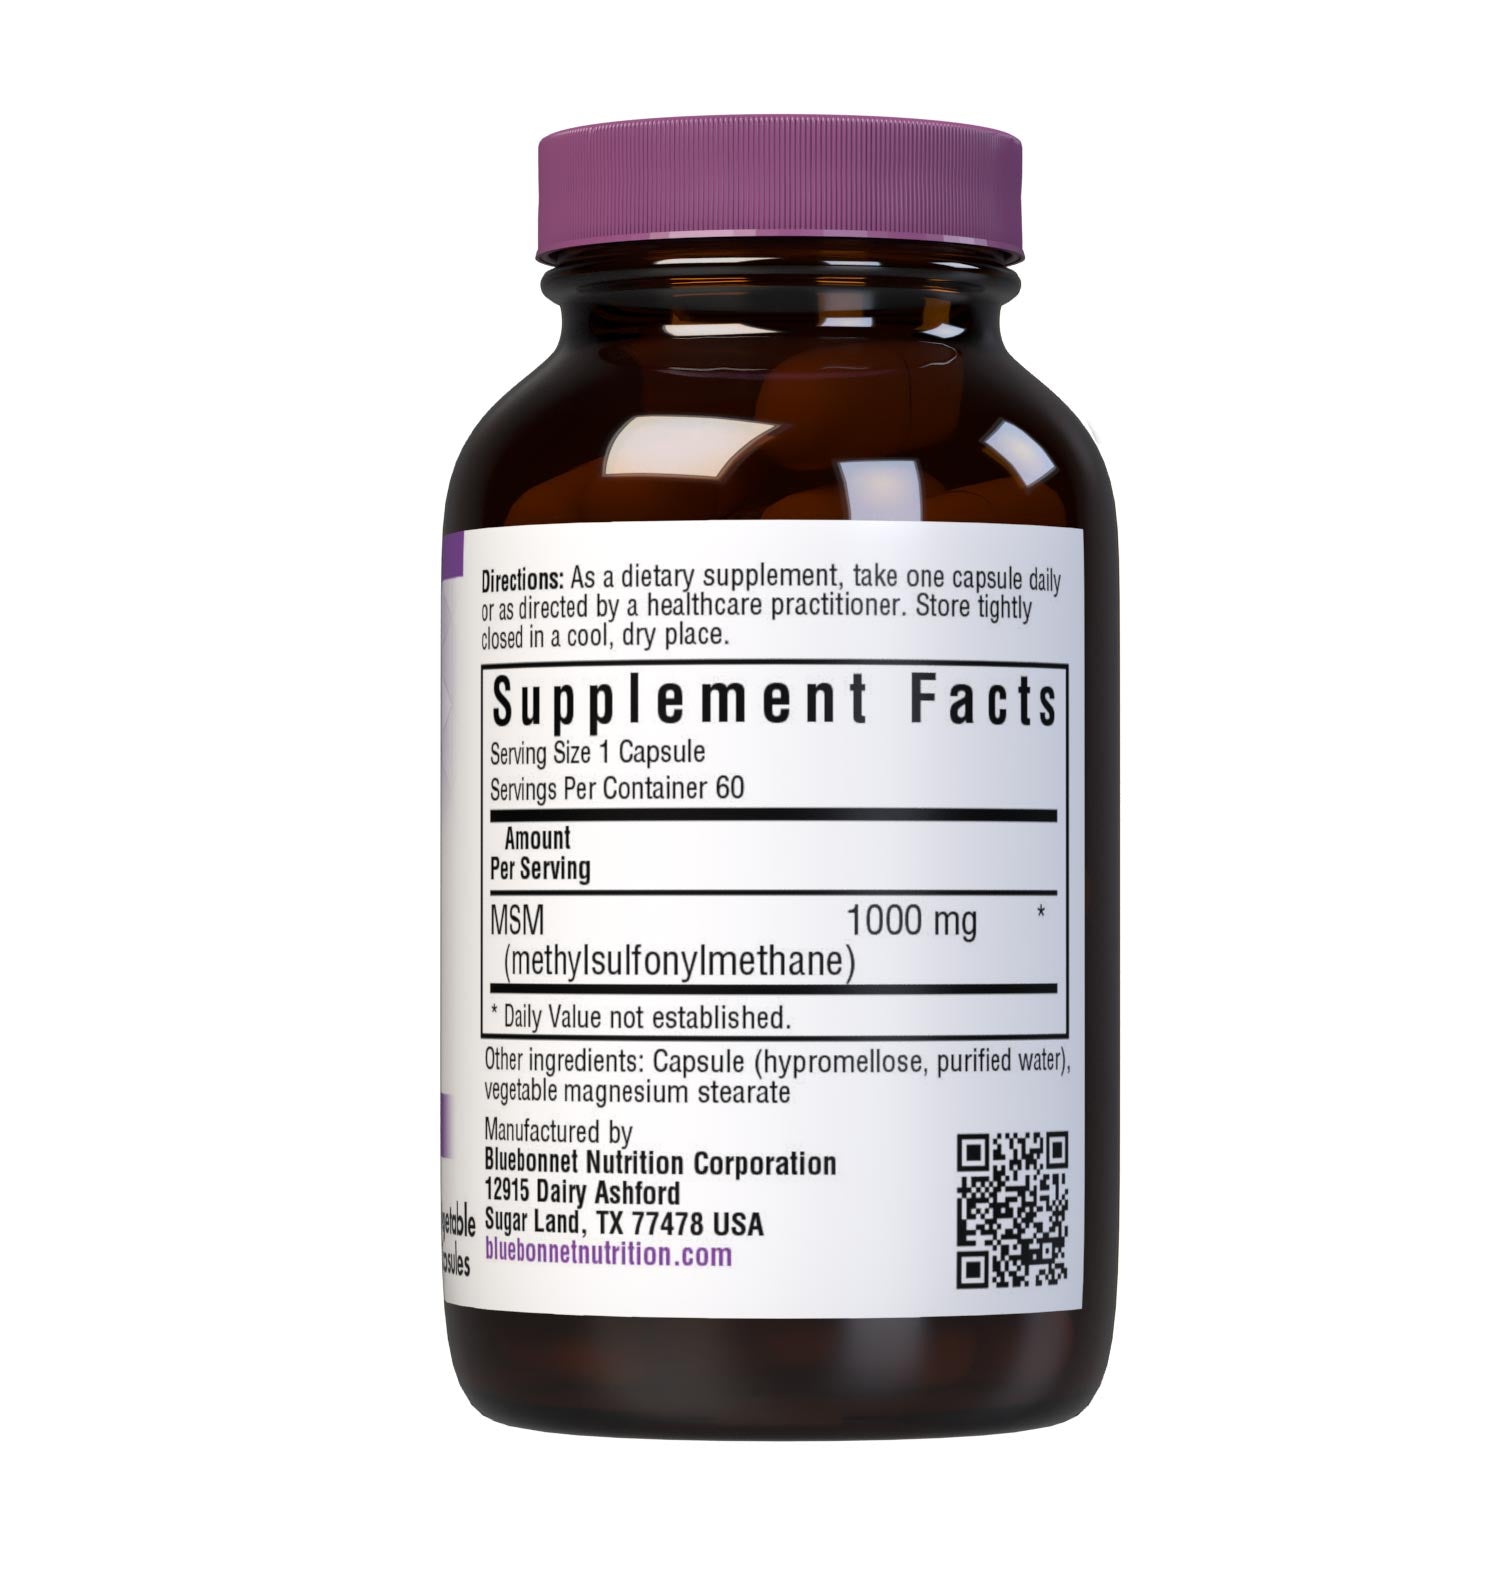 Bluebonnet’s MSM 1000 mg 60 Vegetable Capsules are formulated with patented OptiMSM methylsulfonylmethane, a non-toxic form of active sulfur that is tested in our own state-of-the-art laboratory for purity and potency. MSM helps support healthy joint cartilage and connective tissue. Supplement facts panel. #size_60 count